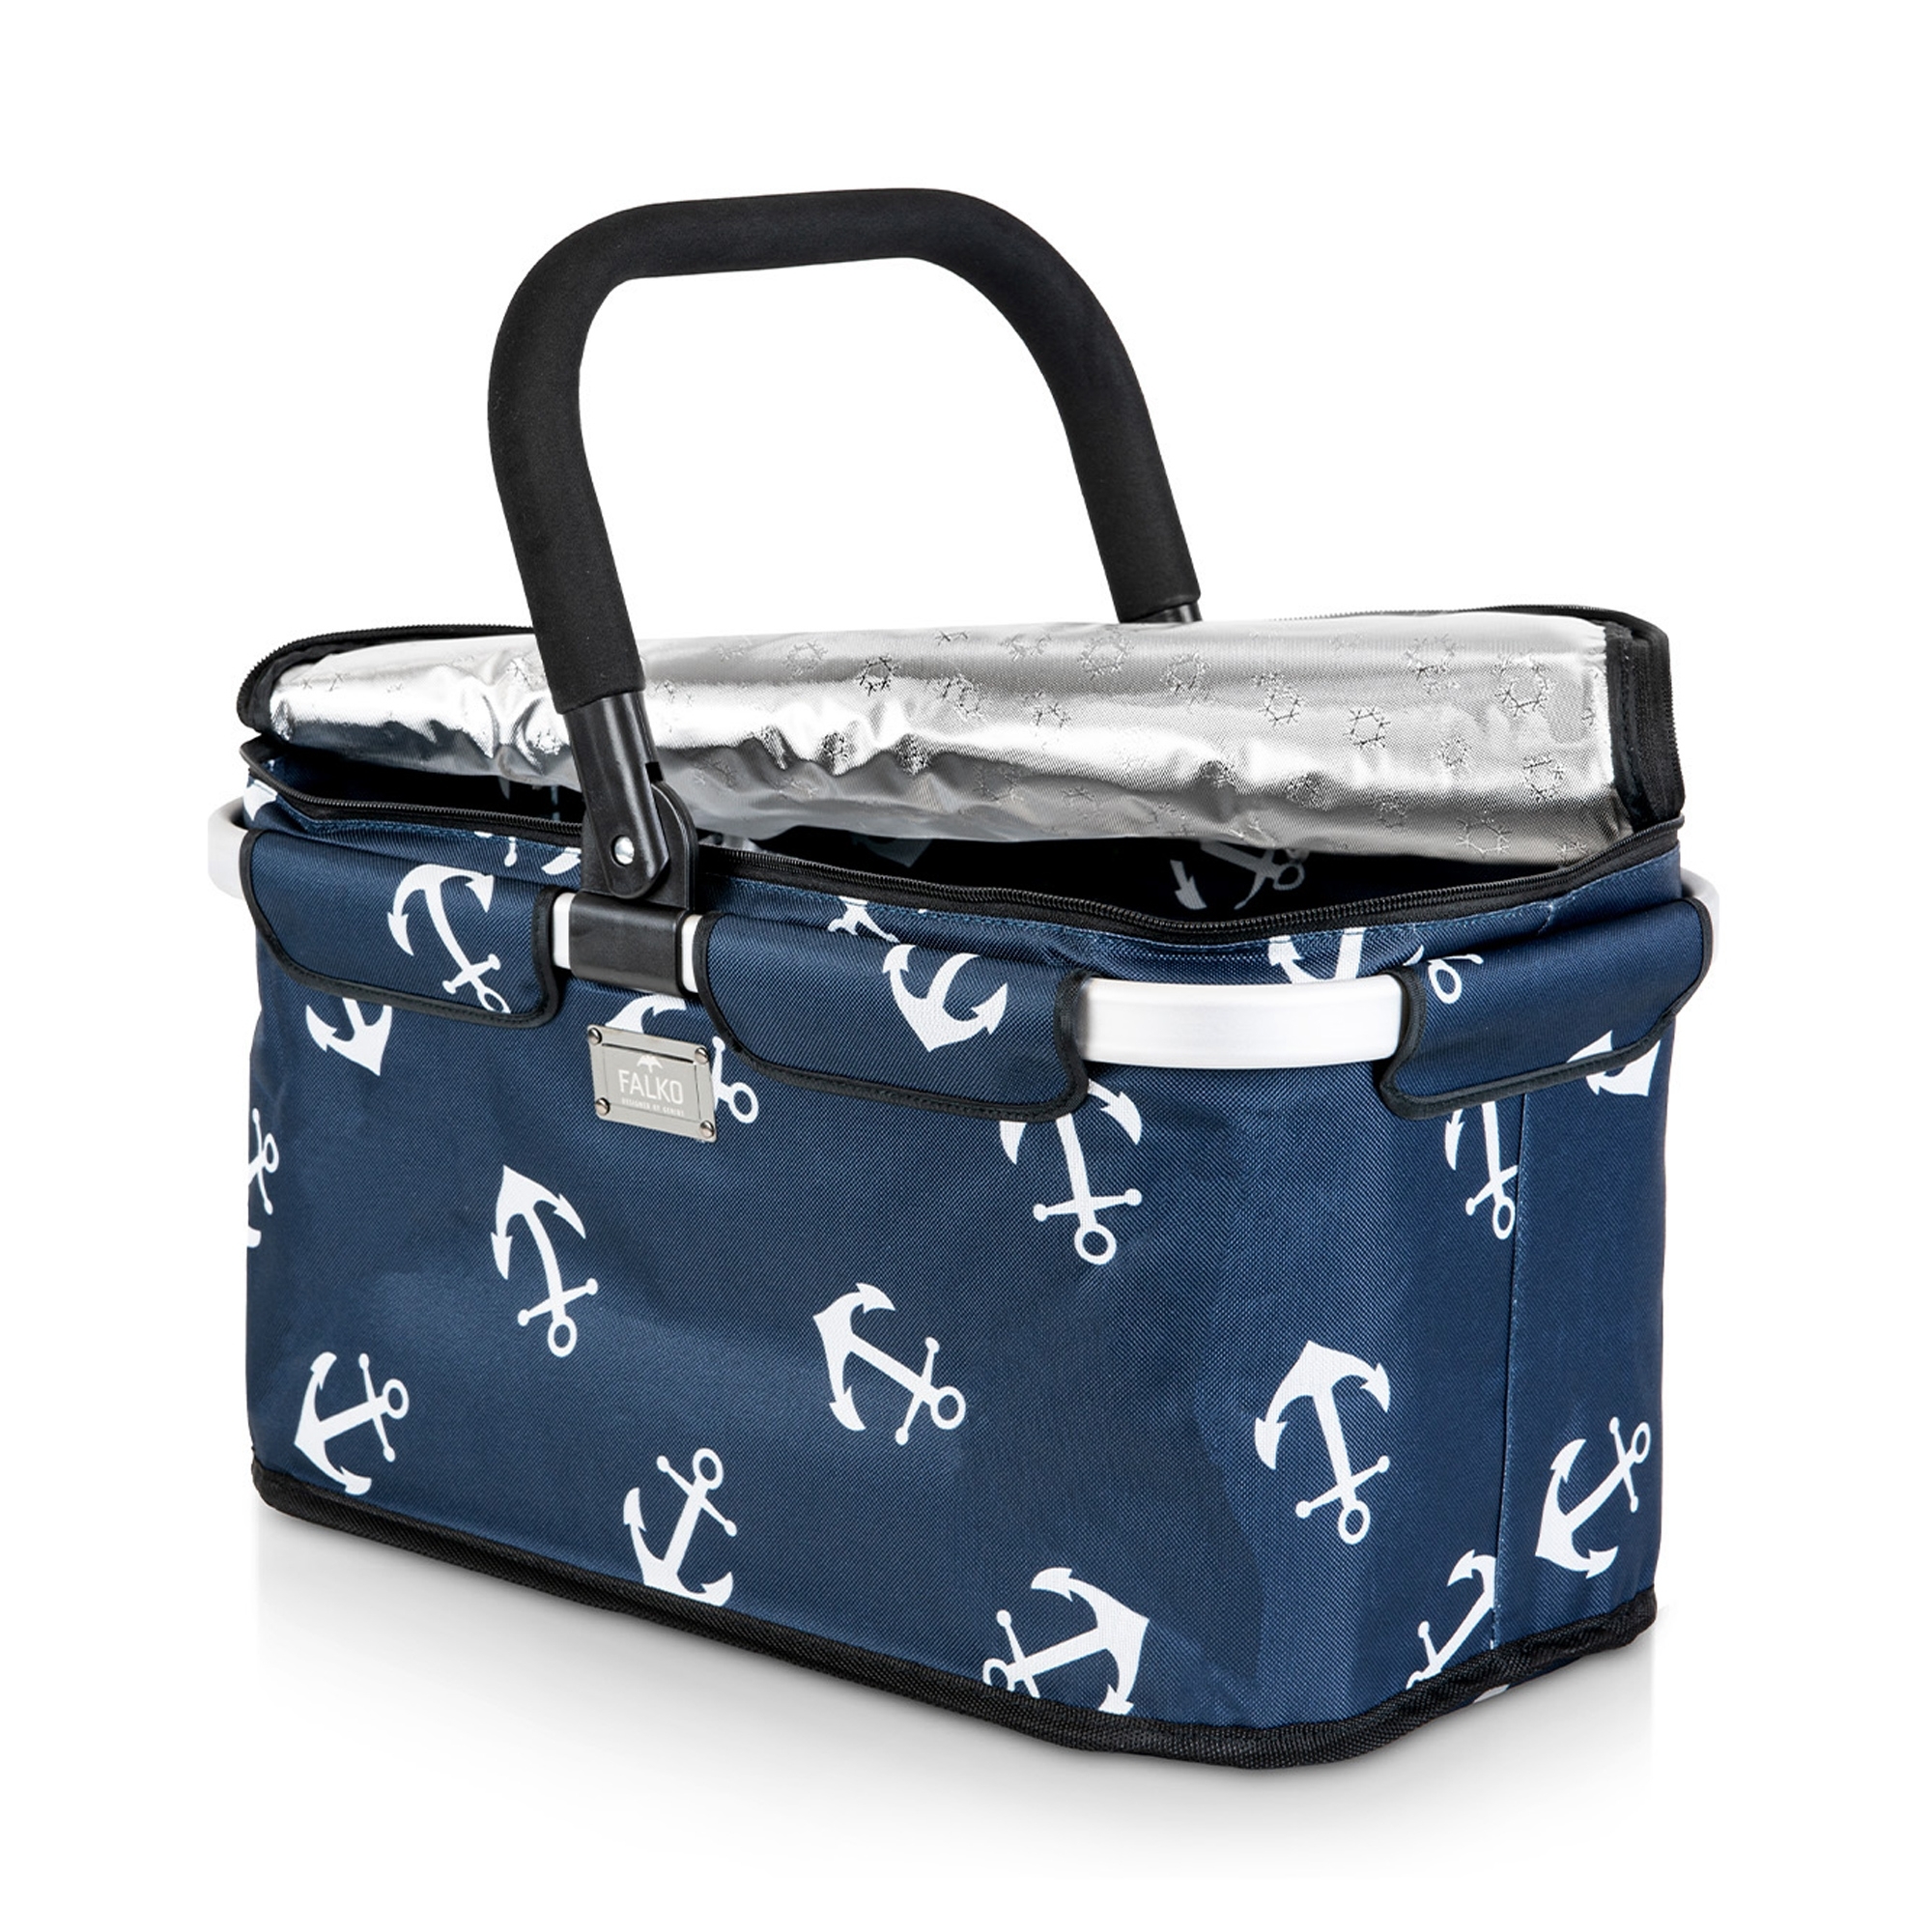 Genius - Falko Thermo Shopping Basket - Blue with white anchors